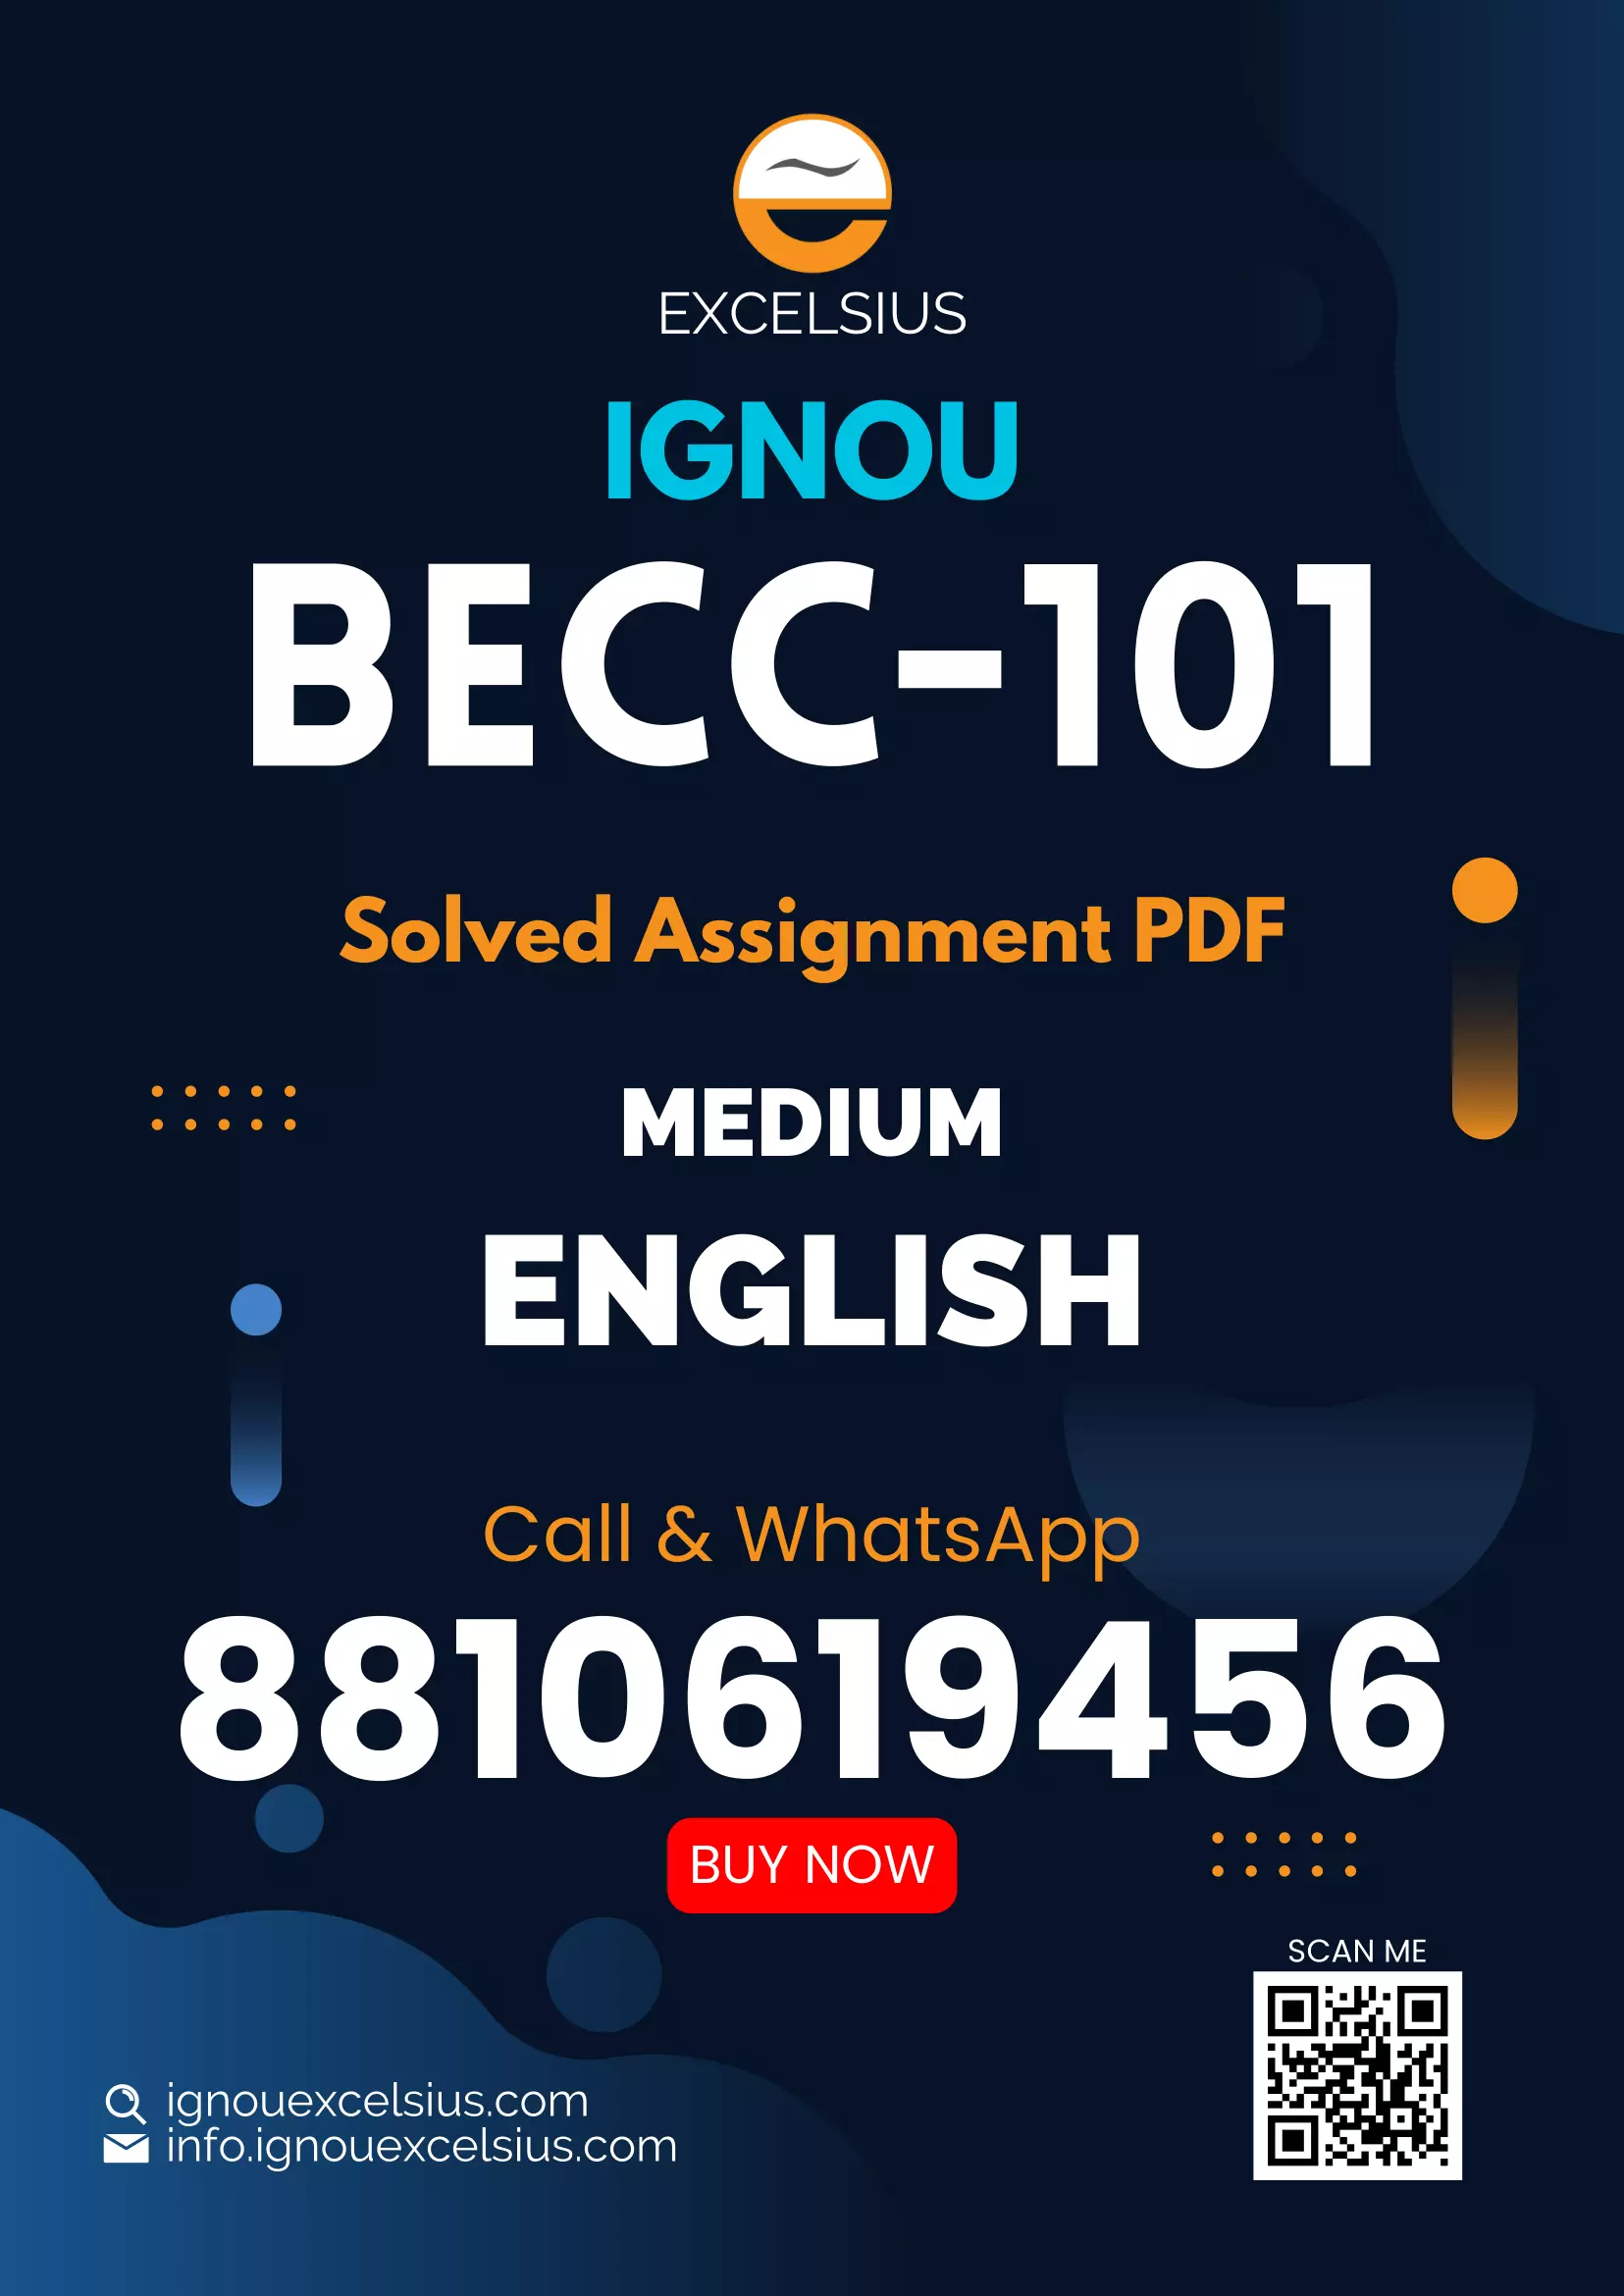 IGNOU BECC-101 - Introductory Microeconomics, Latest Solved Assignment-July 2022 – January 2023